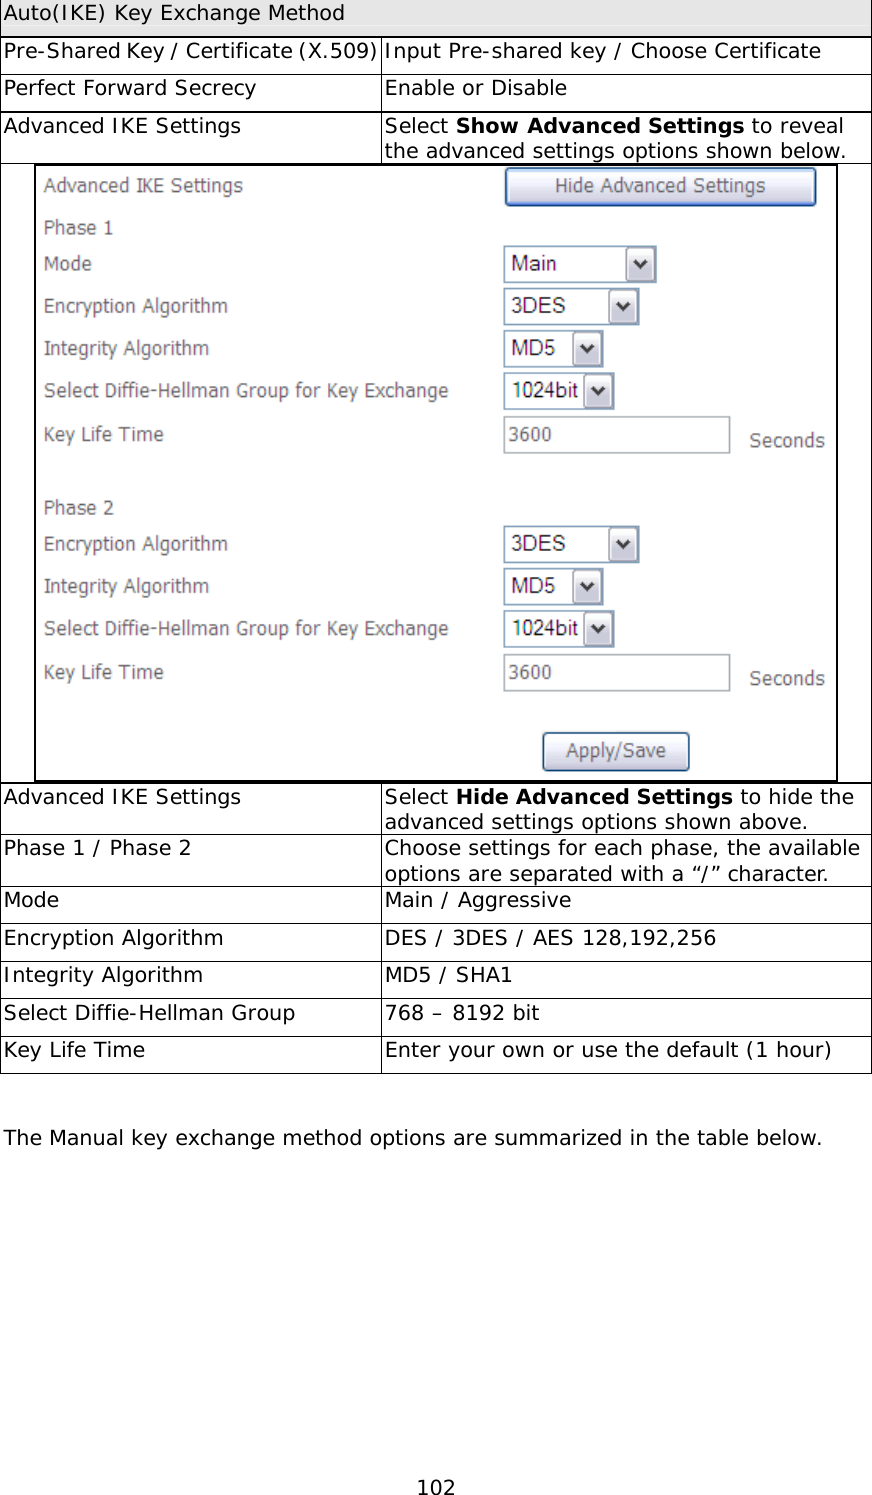  102 Auto(IKE) Key Exchange Method Pre-Shared Key / Certificate (X.509) Input Pre-shared key / Choose Certificate Perfect Forward Secrecy  Enable or Disable  Advanced IKE Settings  Select Show Advanced Settings to reveal the advanced settings options shown below.   Advanced IKE Settings  Select Hide Advanced Settings to hide the advanced settings options shown above.  Phase 1 / Phase 2  Choose settings for each phase, the available options are separated with a “/” character.  Mode  Main / Aggressive Encryption Algorithm  DES / 3DES / AES 128,192,256 Integrity Algorithm  MD5 / SHA1 Select Diffie-Hellman Group  768 – 8192 bit Key Life Time  Enter your own or use the default (1 hour)   The Manual key exchange method options are summarized in the table below.            